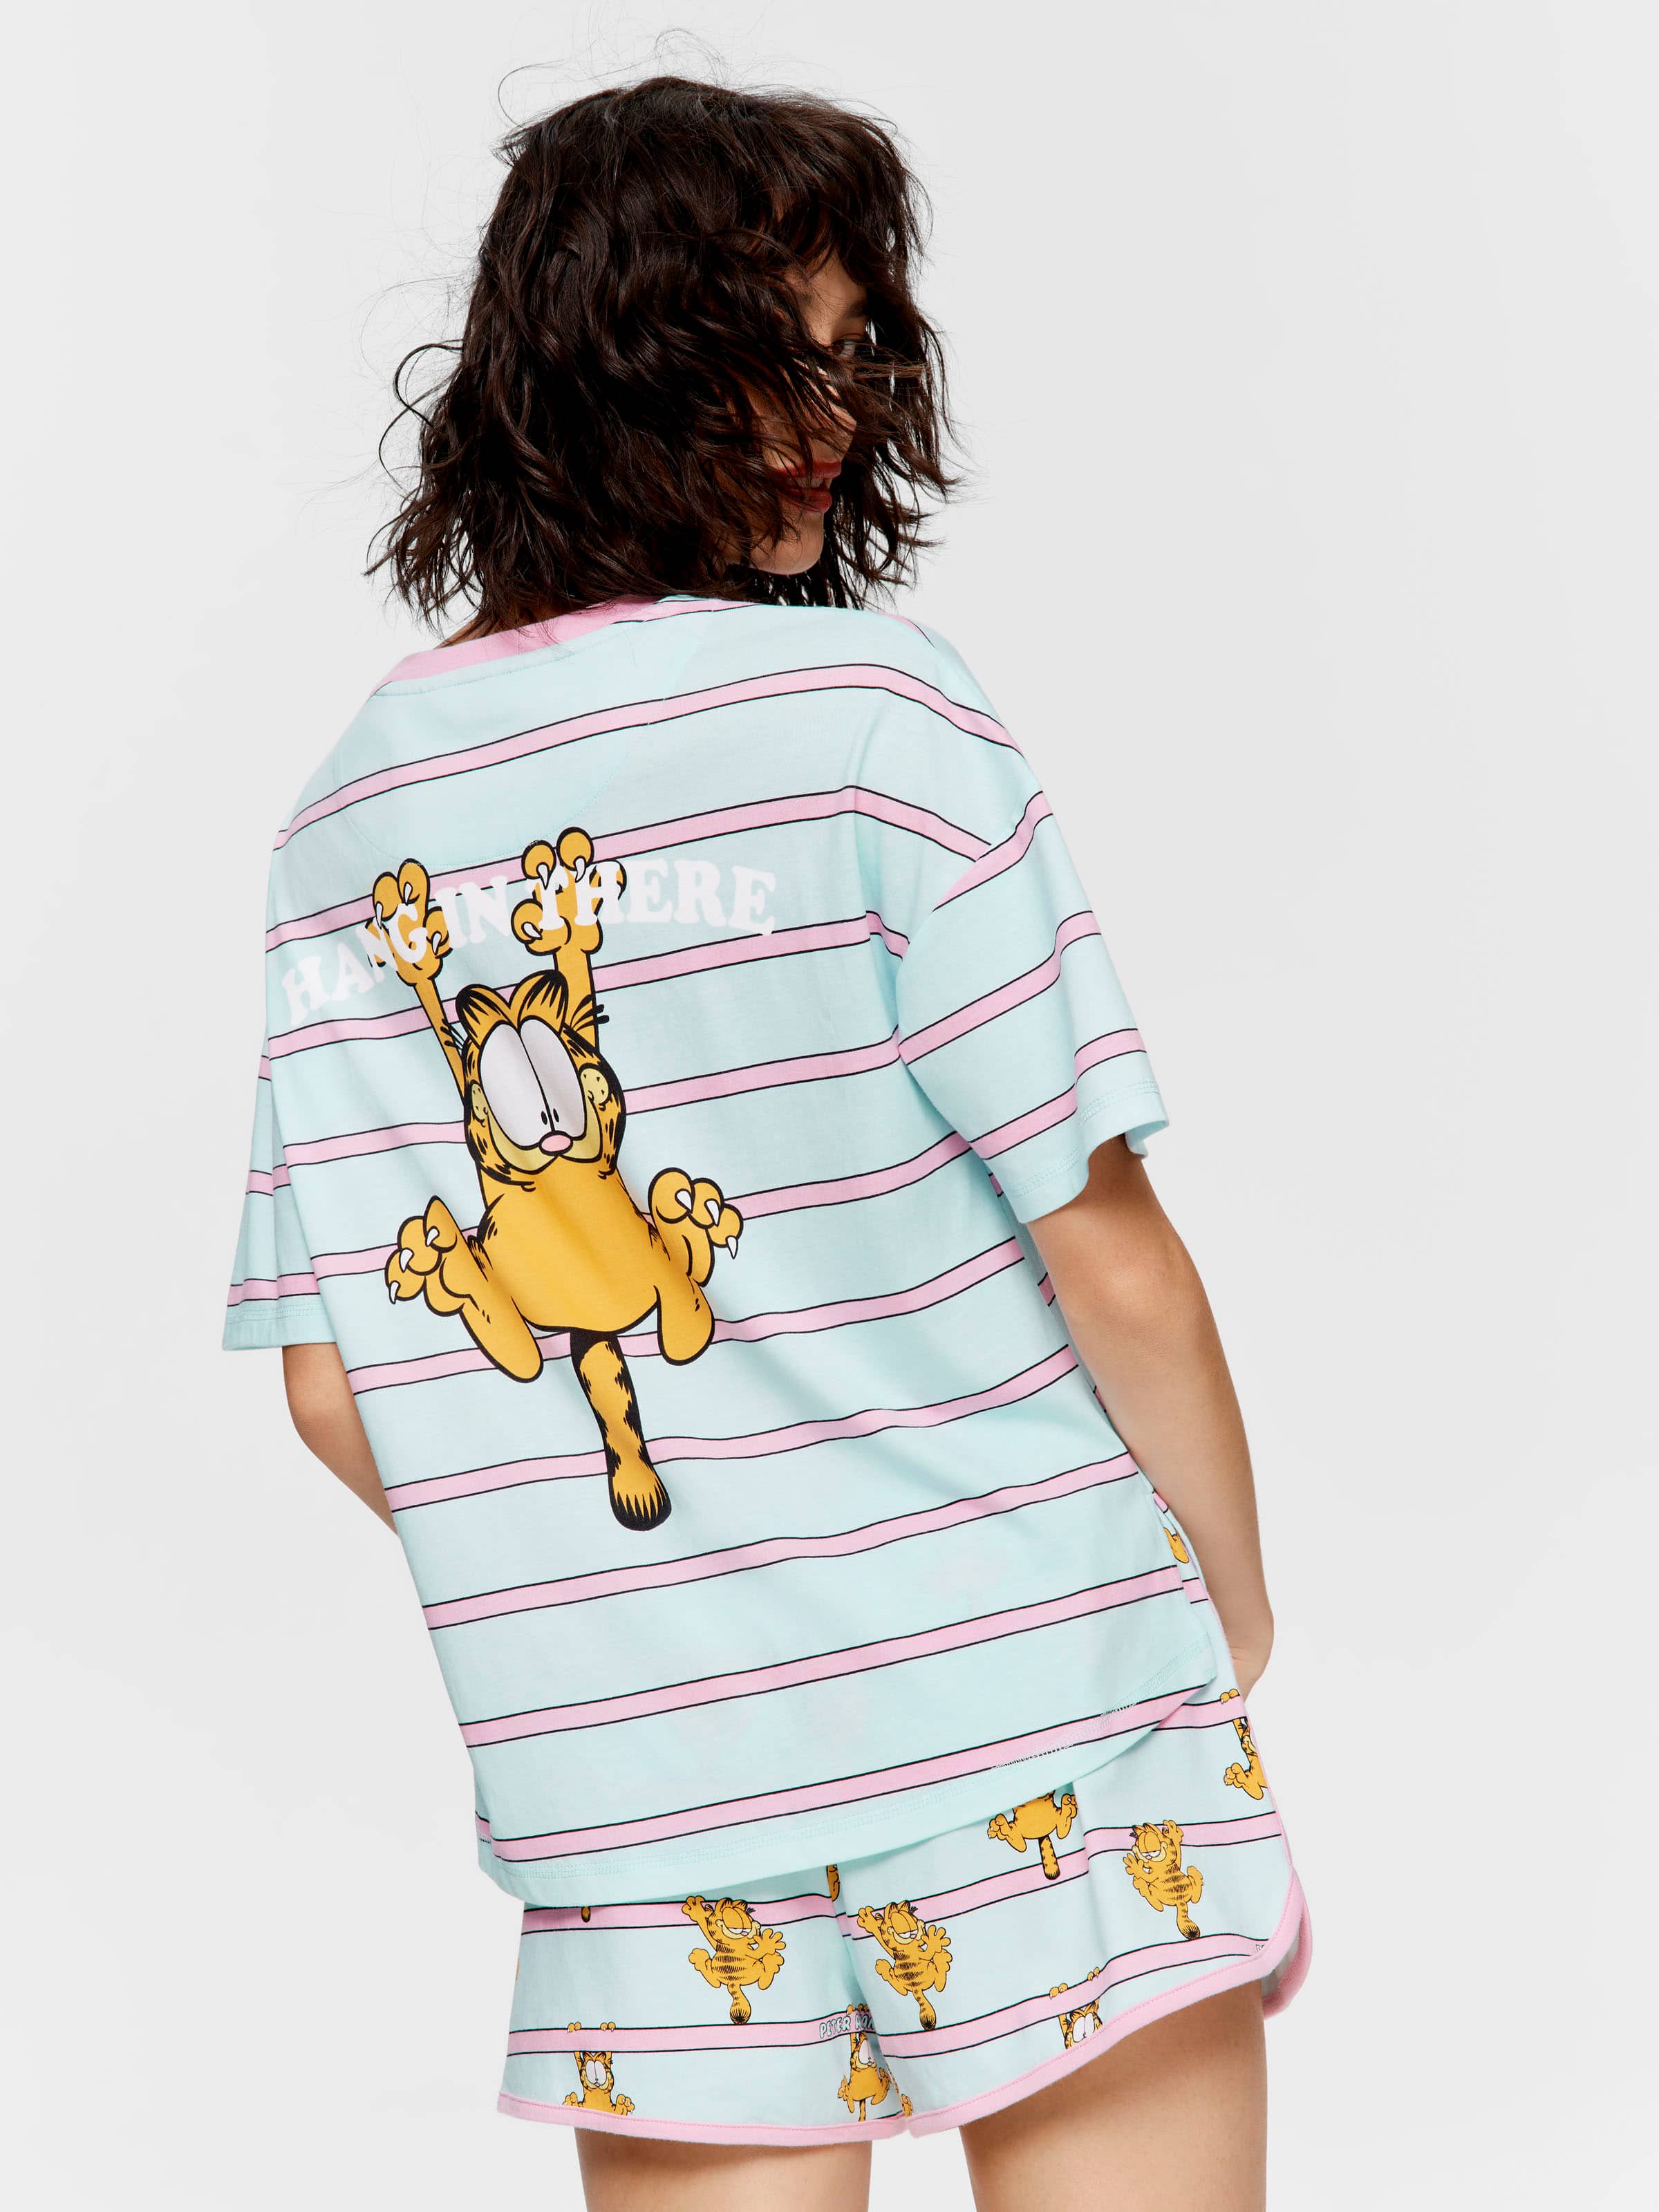 Garfield Hang In There Tee